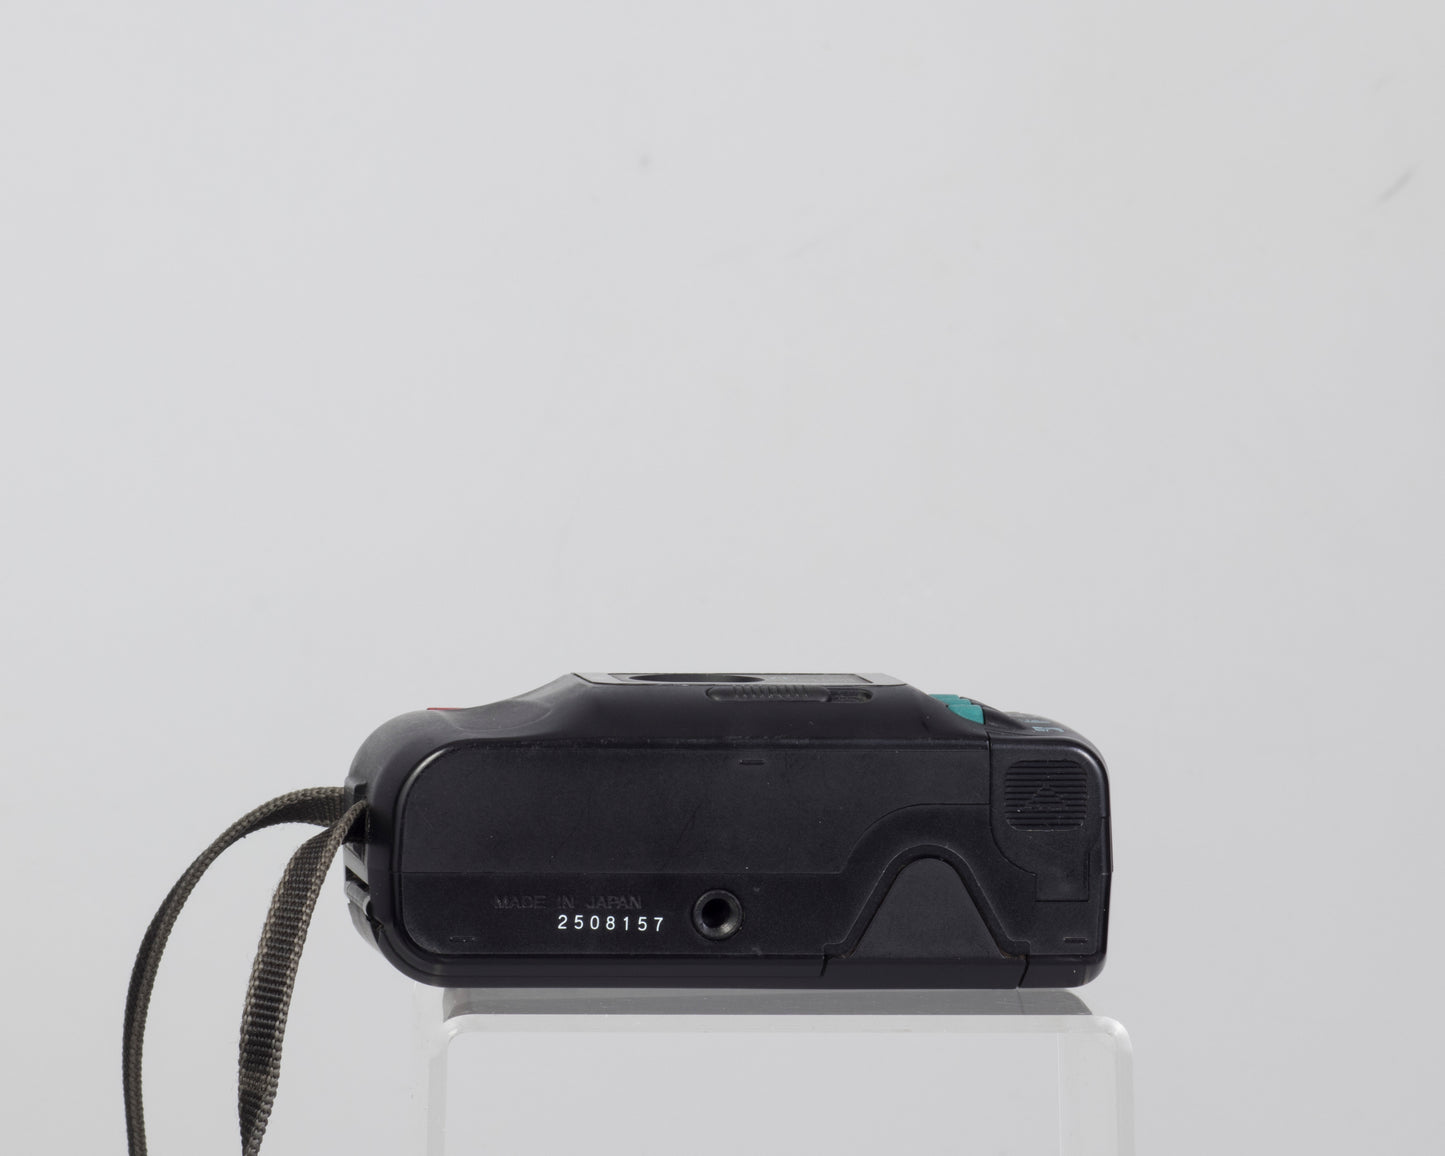 The Konica MT-100 is a 35mm point-and-shoot camera from 1989 (bottom view)